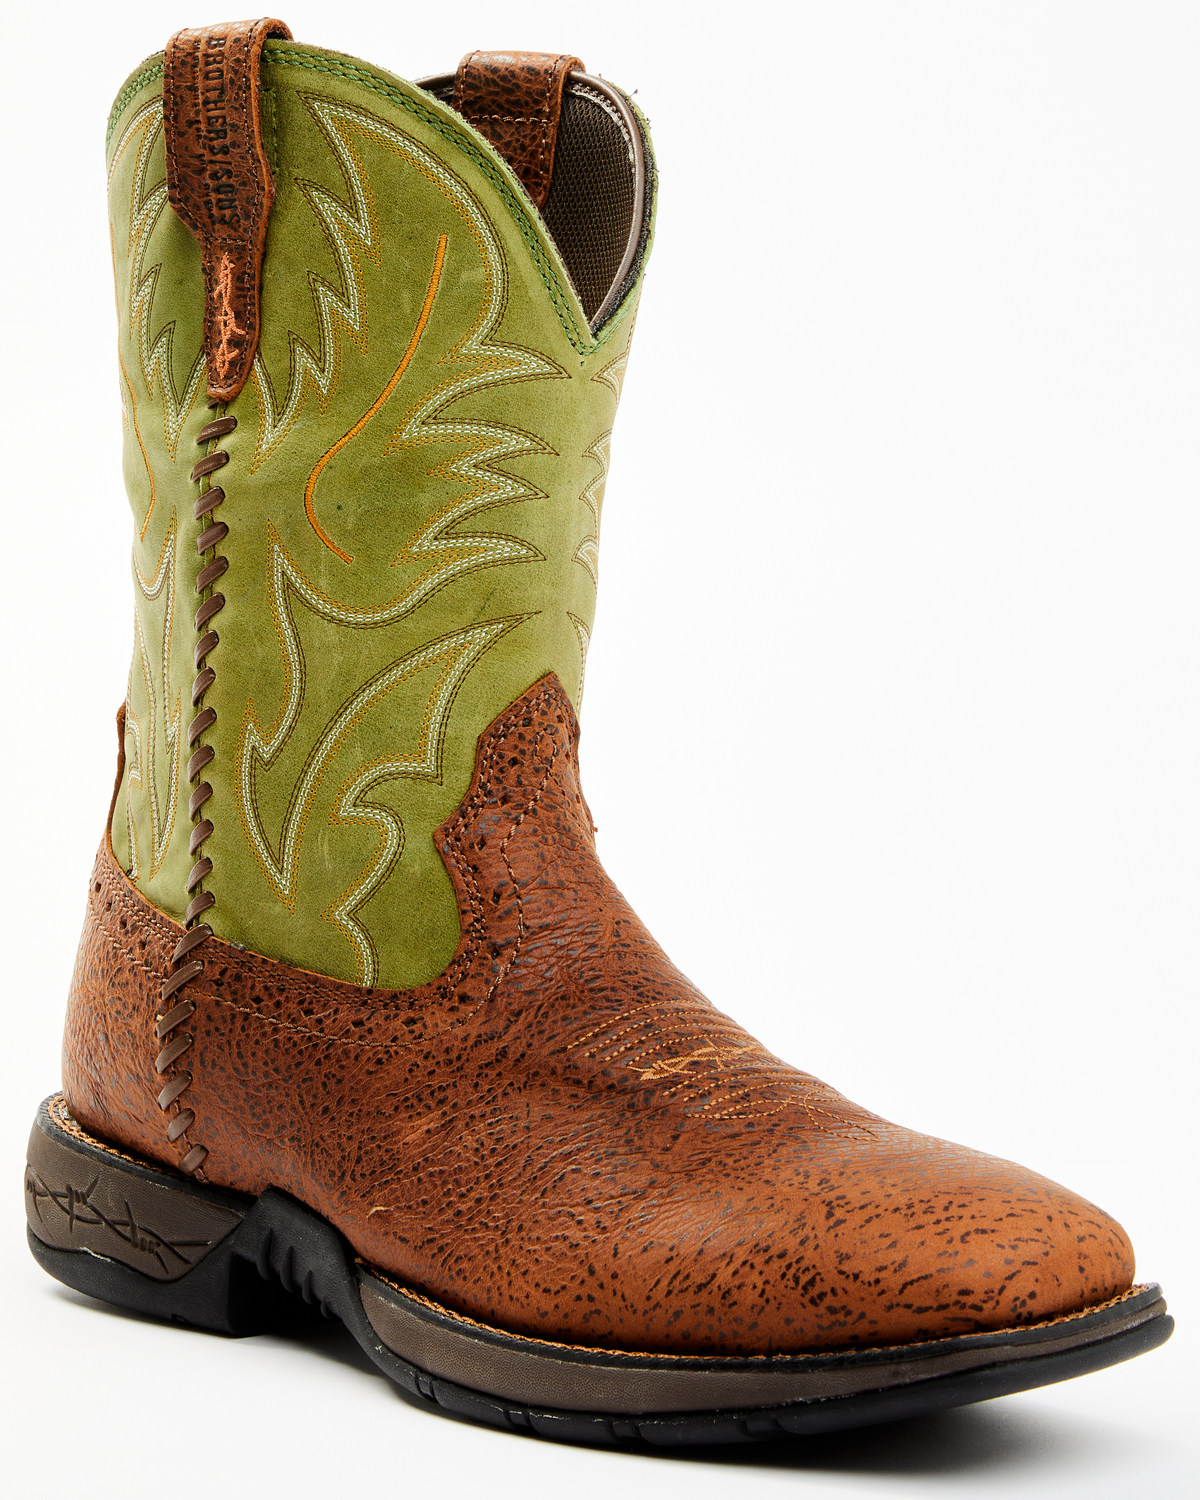 Brothers and Sons Men's High Hopes Lite Performance Western Boots - Broad Square Toe